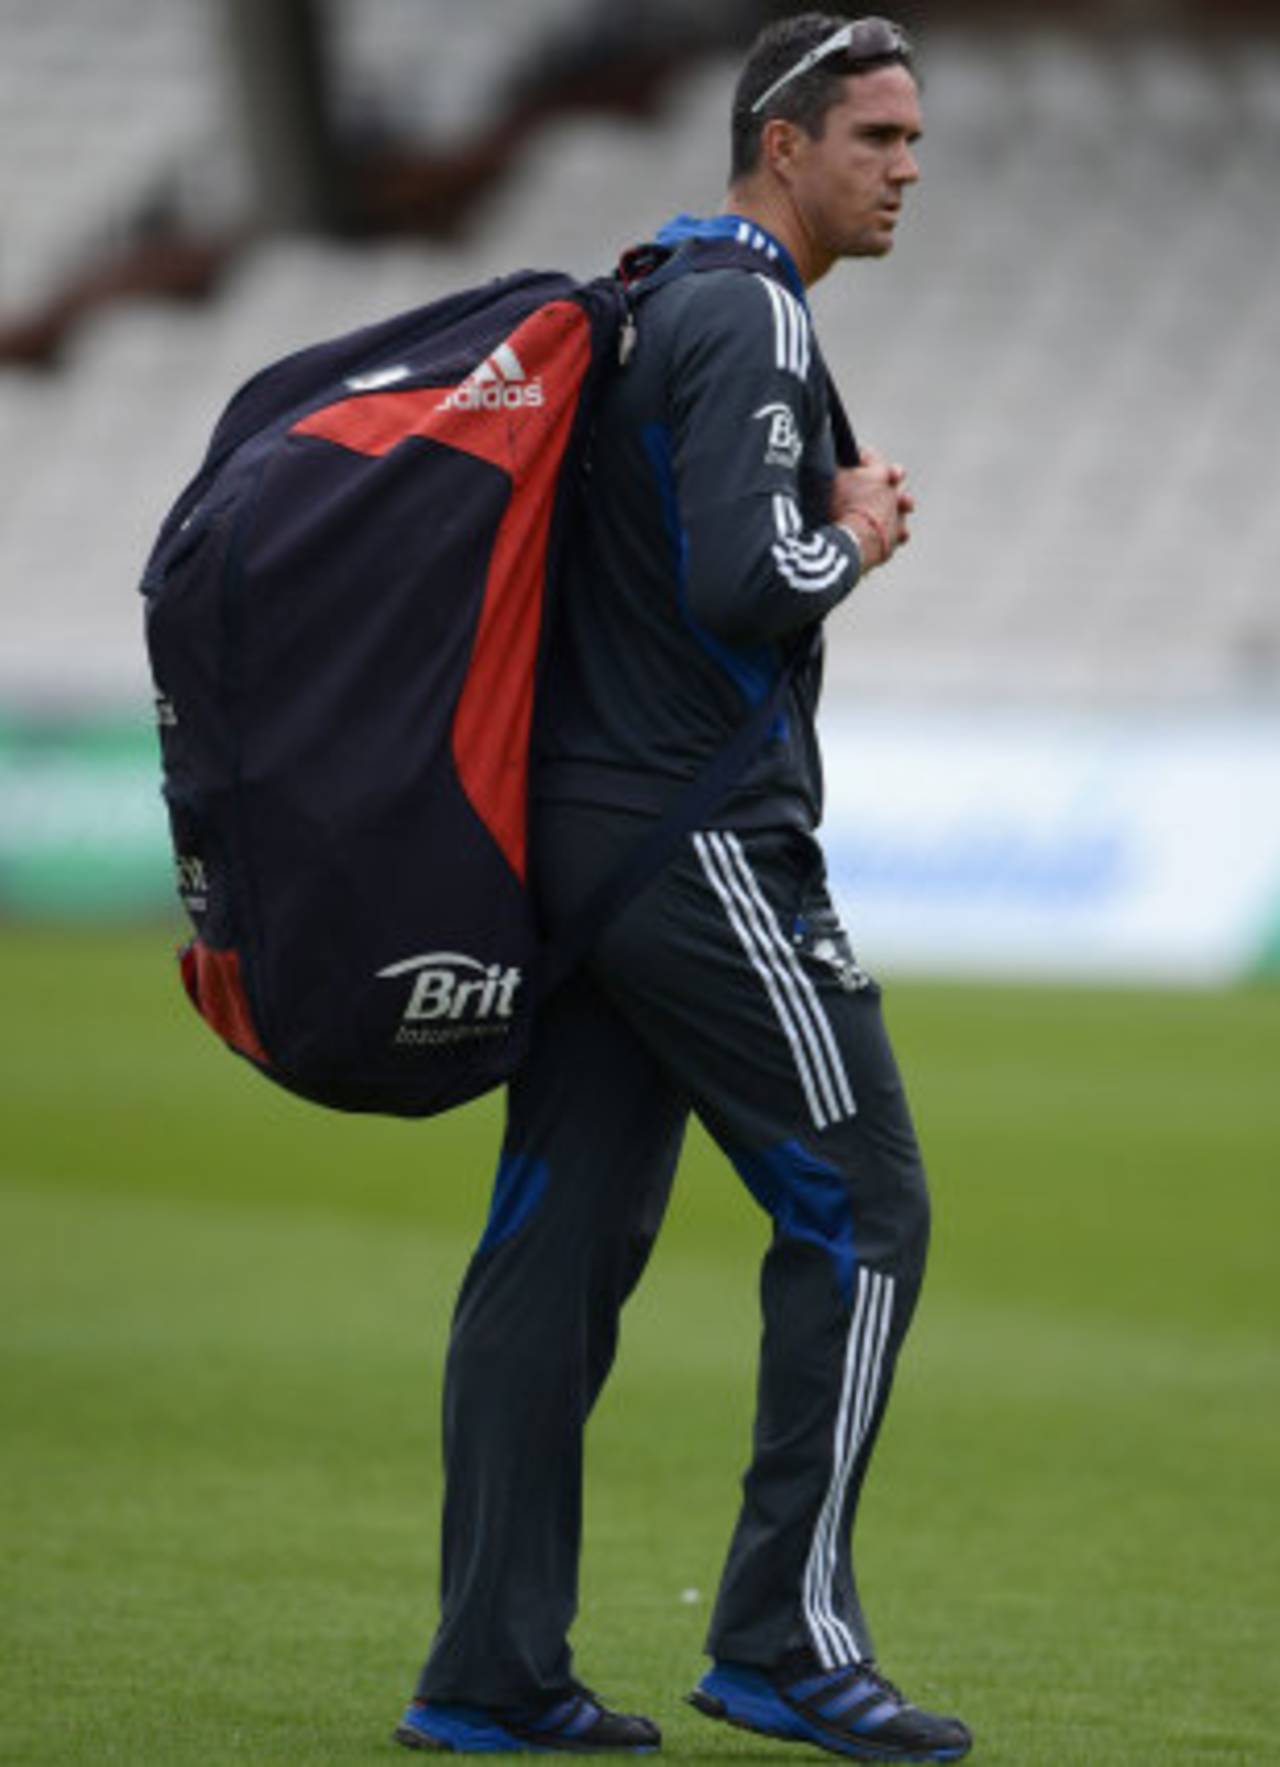 Kevin Pietersen leaves net practise, England v South Africa, 1st Test, The Oval, July, 18, 2012